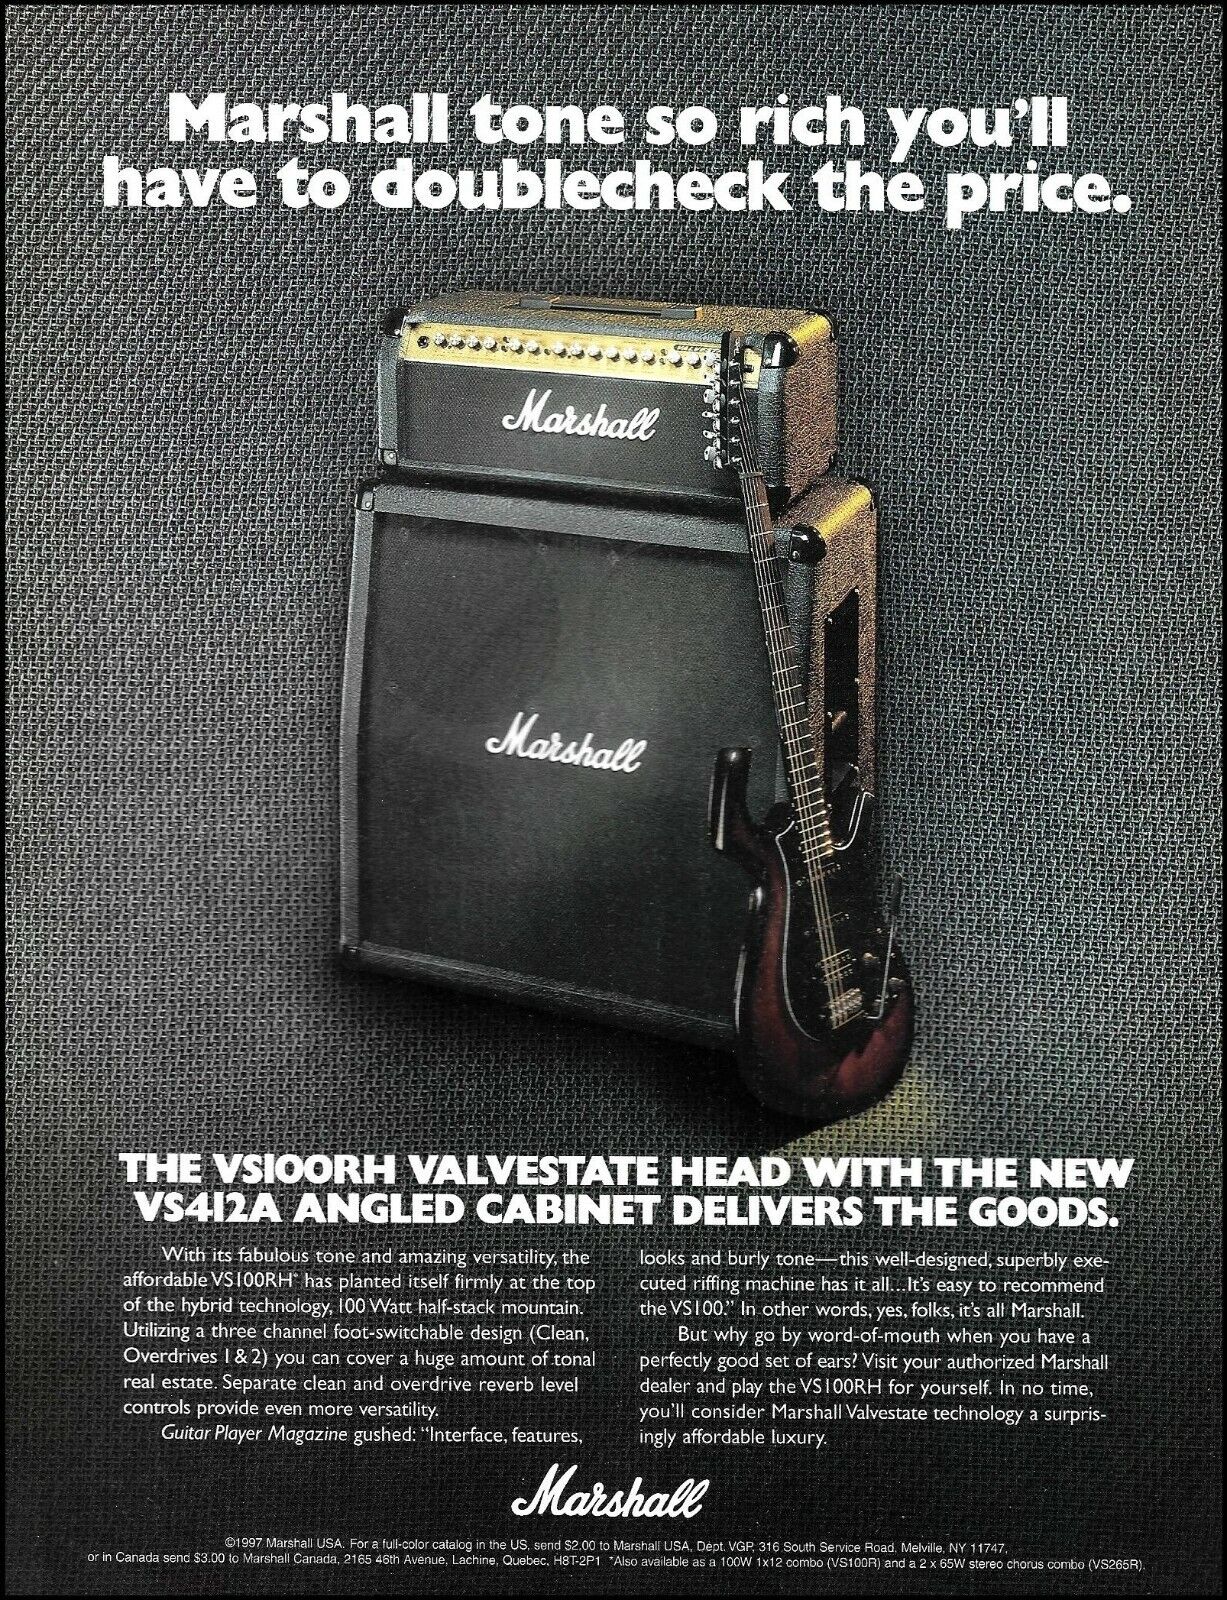 Marshall VS 100R-H Head 412-A Cabinet amp ad 1997 amplifier advertisement print